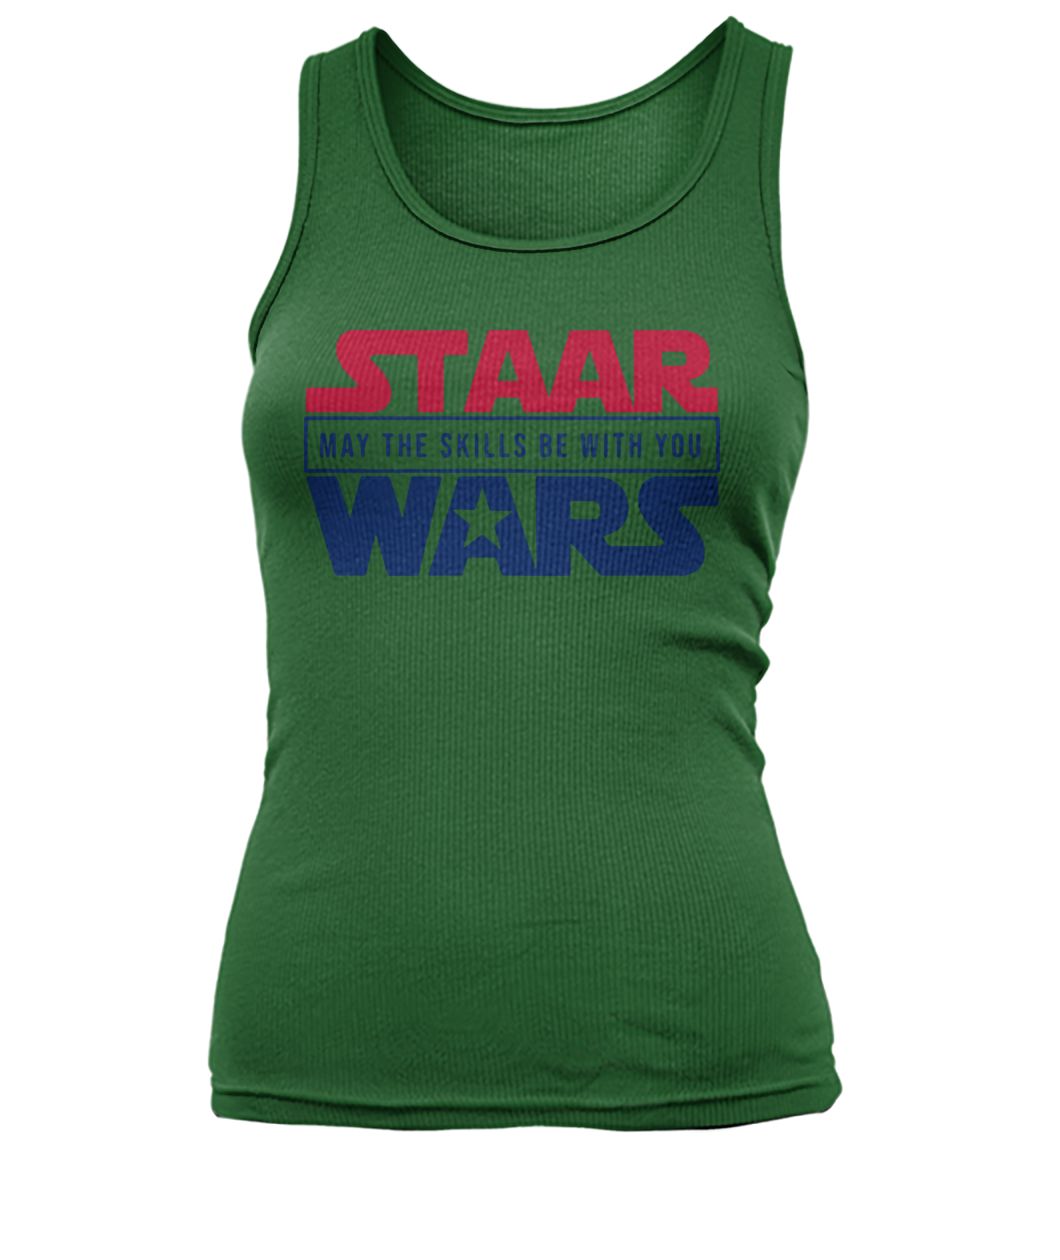 Staar Wars may the skills be with you women's tank top